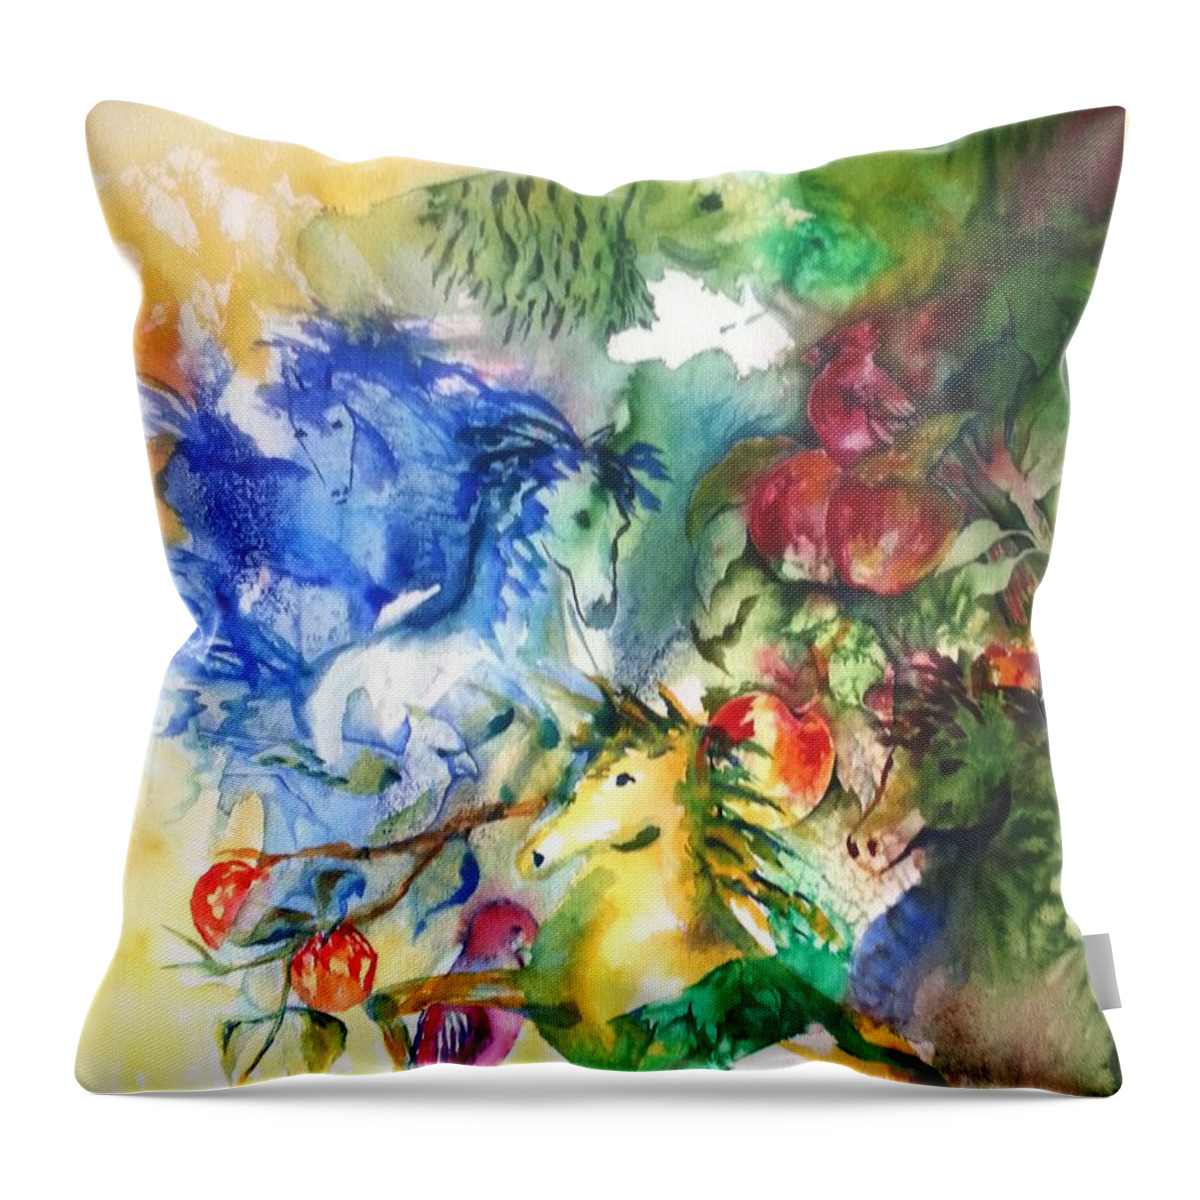 Ksg Throw Pillow featuring the painting Abstract Horses by Kim Shuckhart Gunns